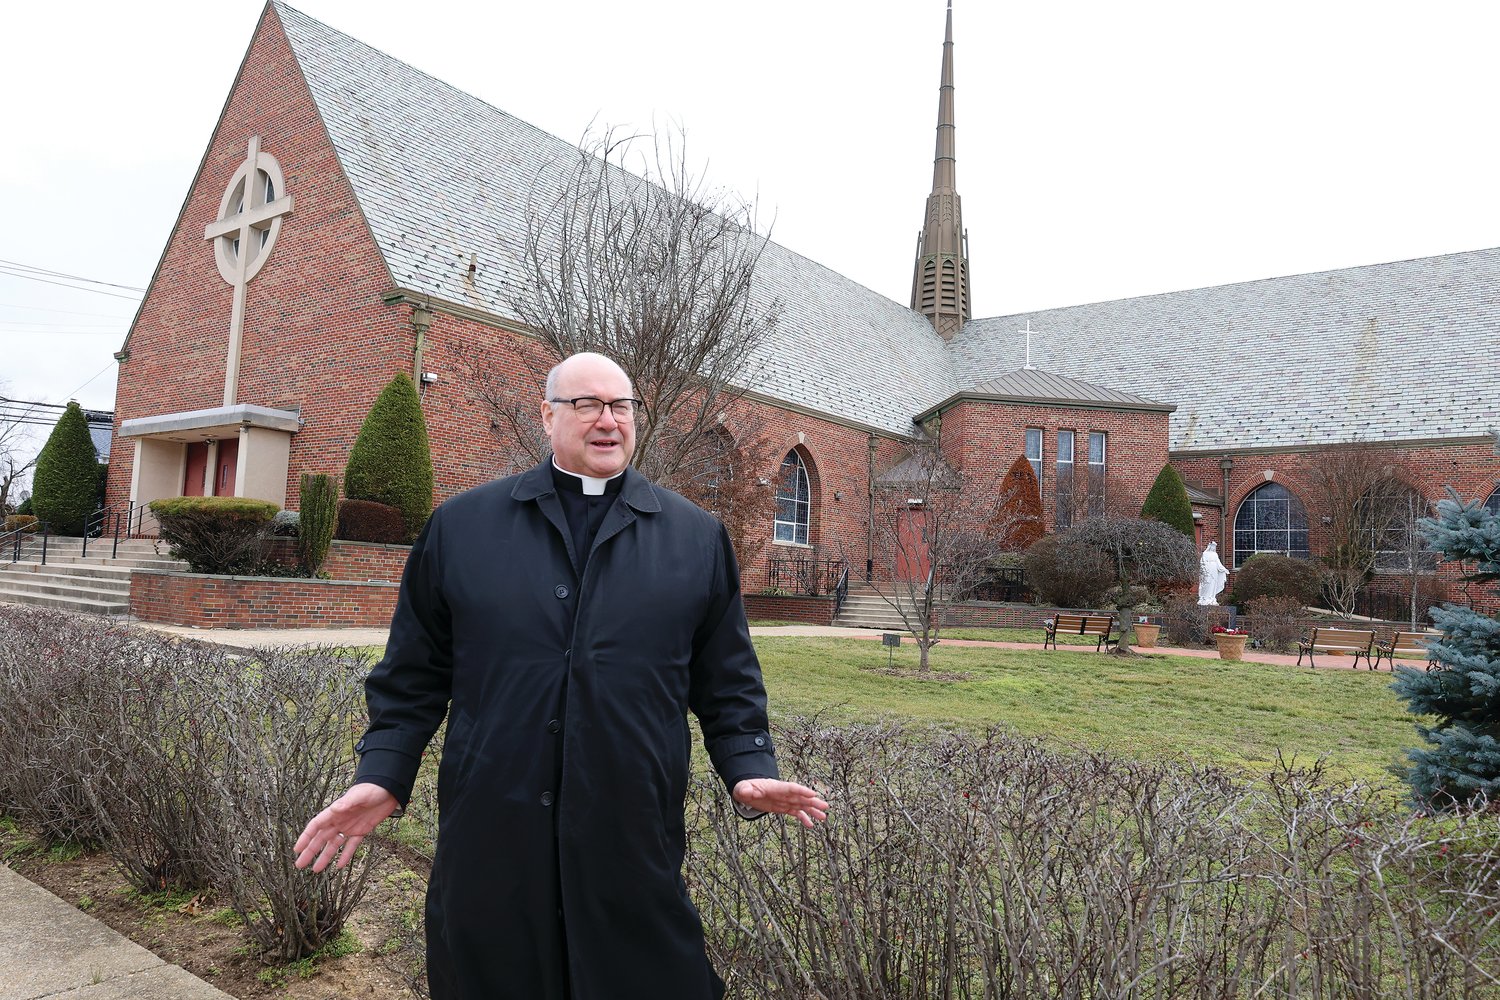 Bishop Henning describes what it was like for him and his family to be parishioners of Holy Name of Mary Church, which is a short walk from where he grew up in Valley Stream, on Long Island.